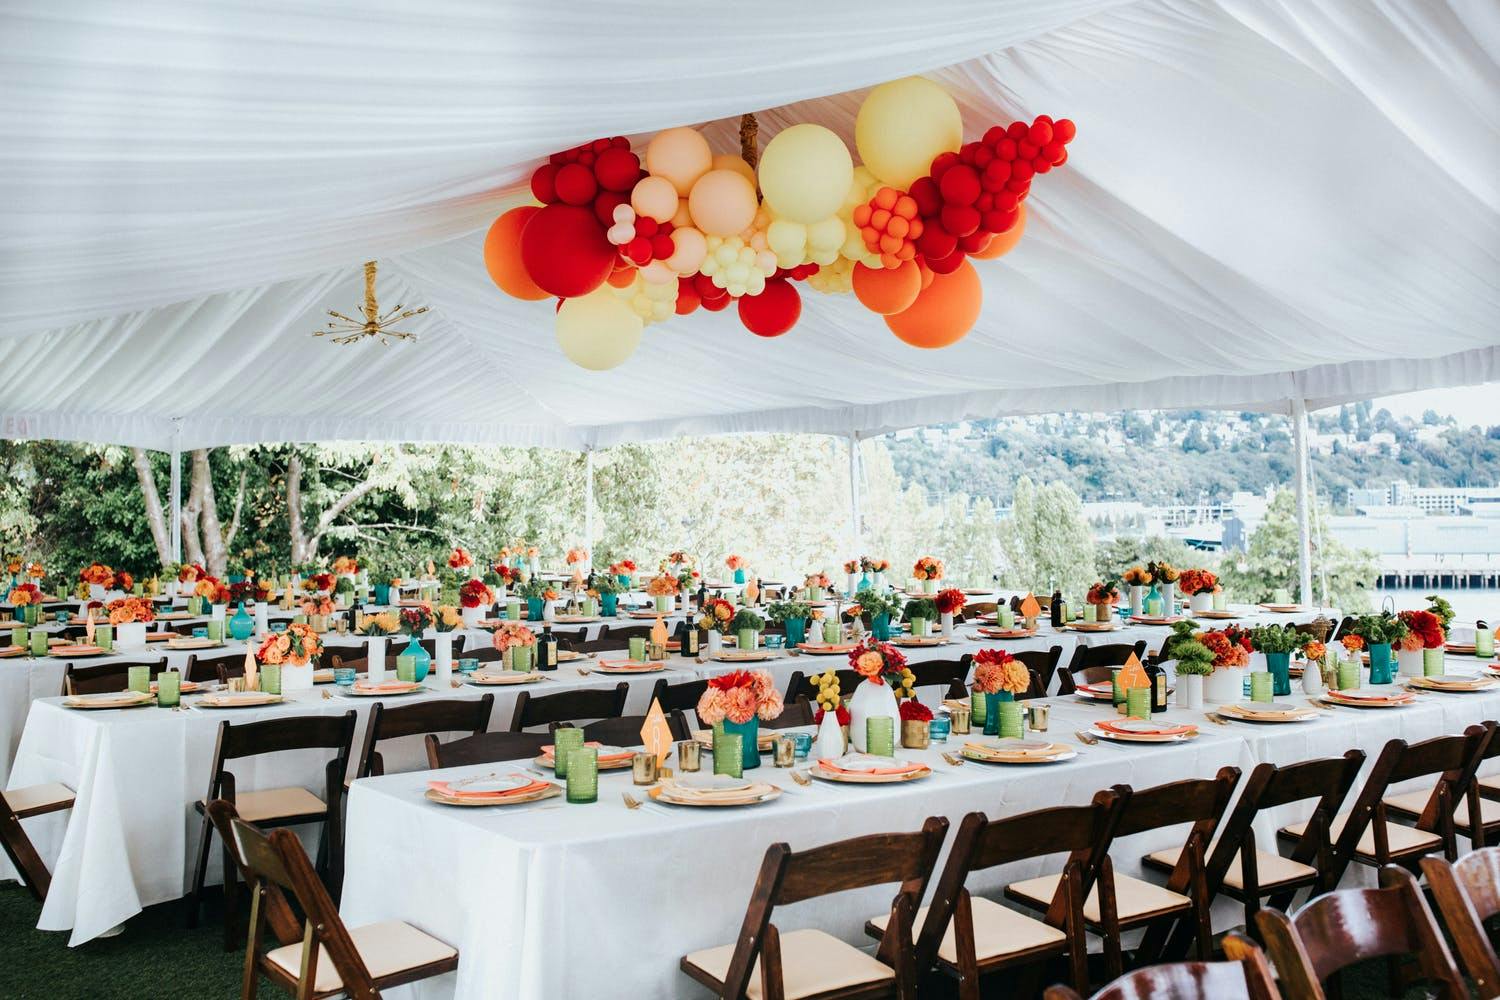 Colorful Blooms “Pop” Against White Tablescapes (Beneath a Sunrise-Bright Balloon Installation) | PartySlate